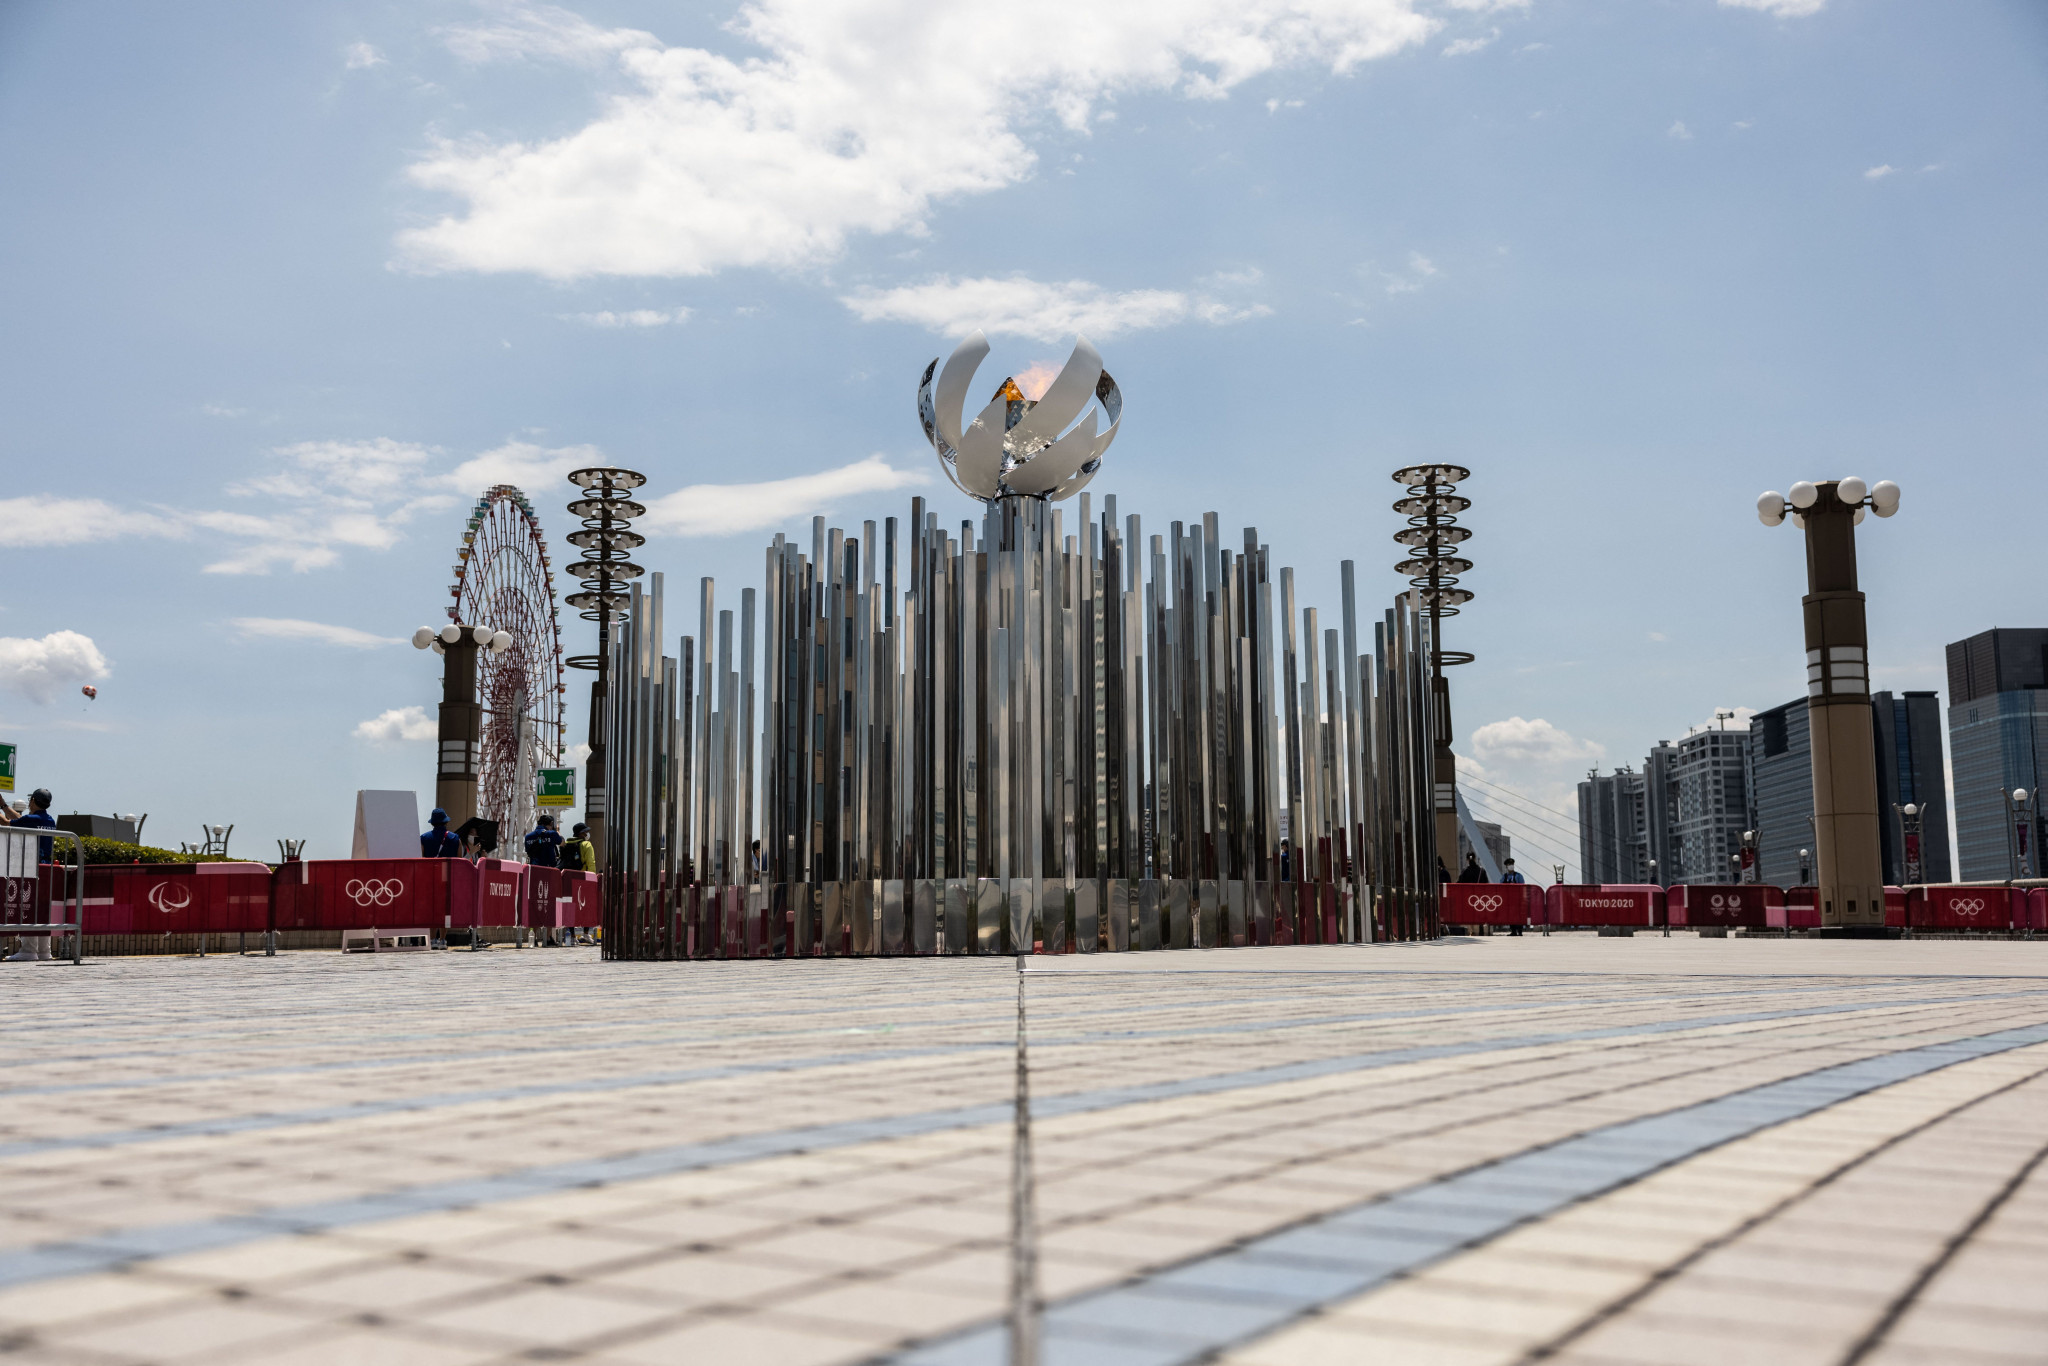 Olympic Flame finds permanent home for Games at Tokyo waterfront area